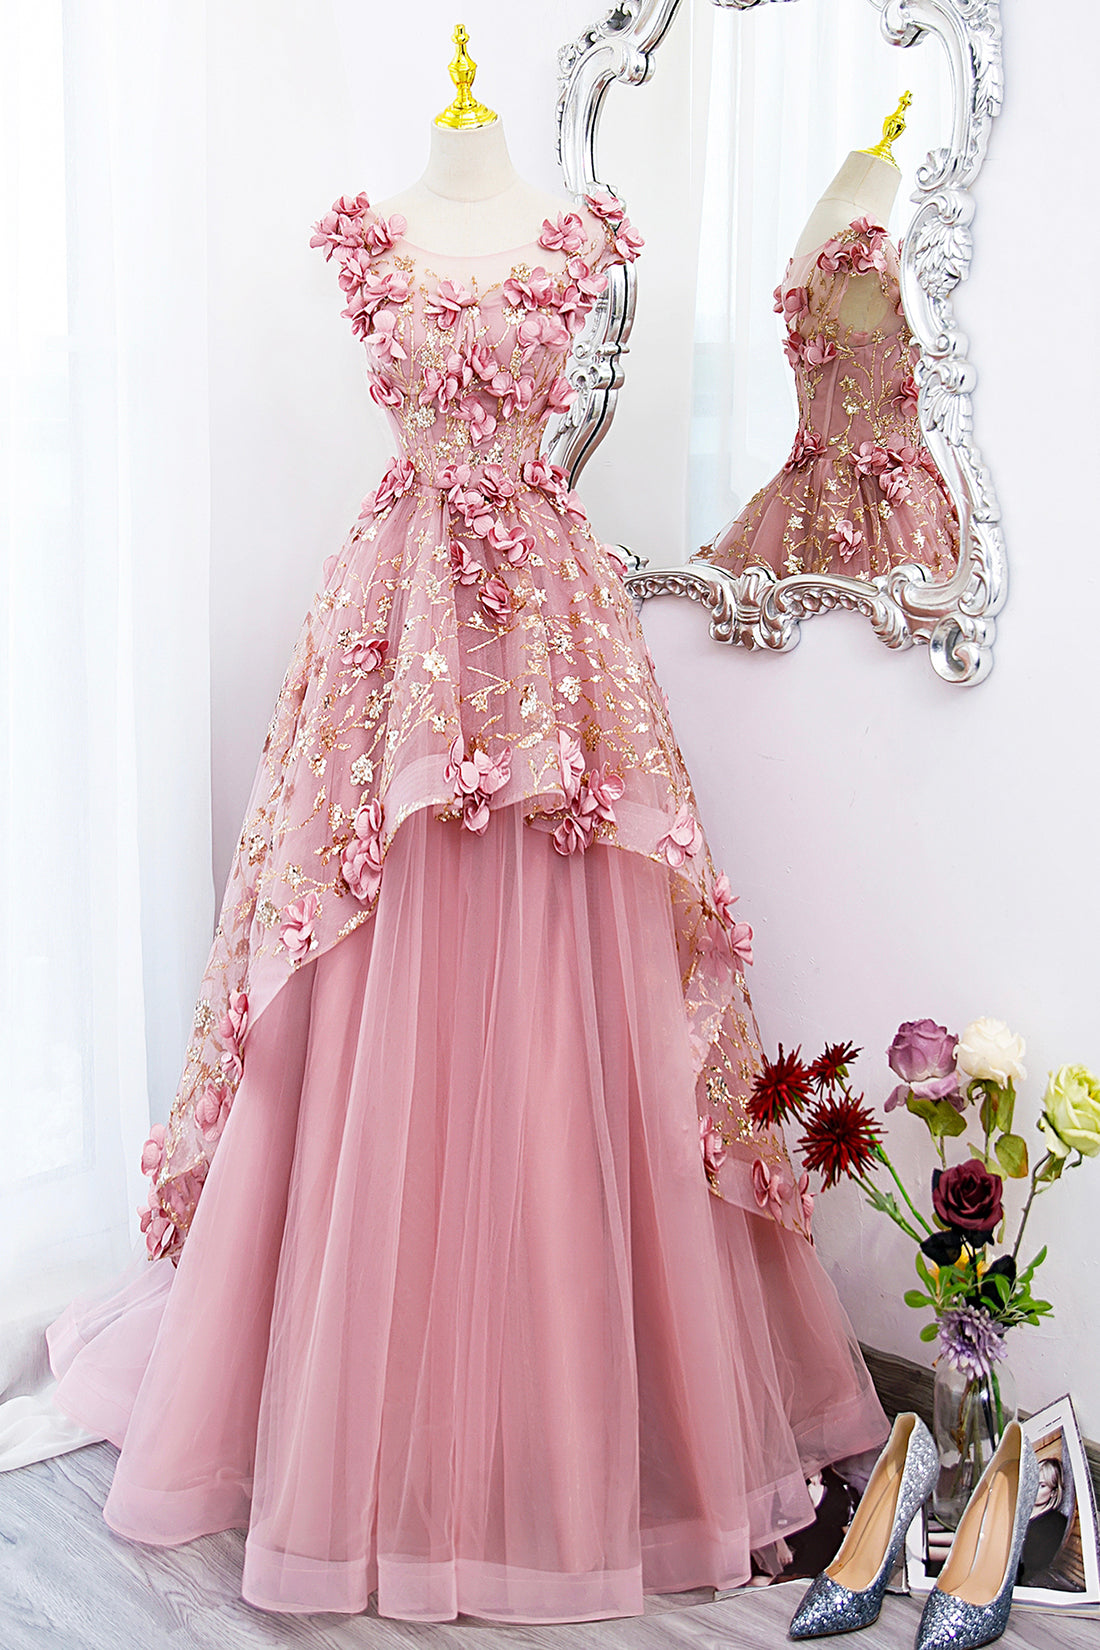 Beautiful Pink Tulle Long Prom Dress with Flowers, Lovely Tulle Sweet 16 Dress